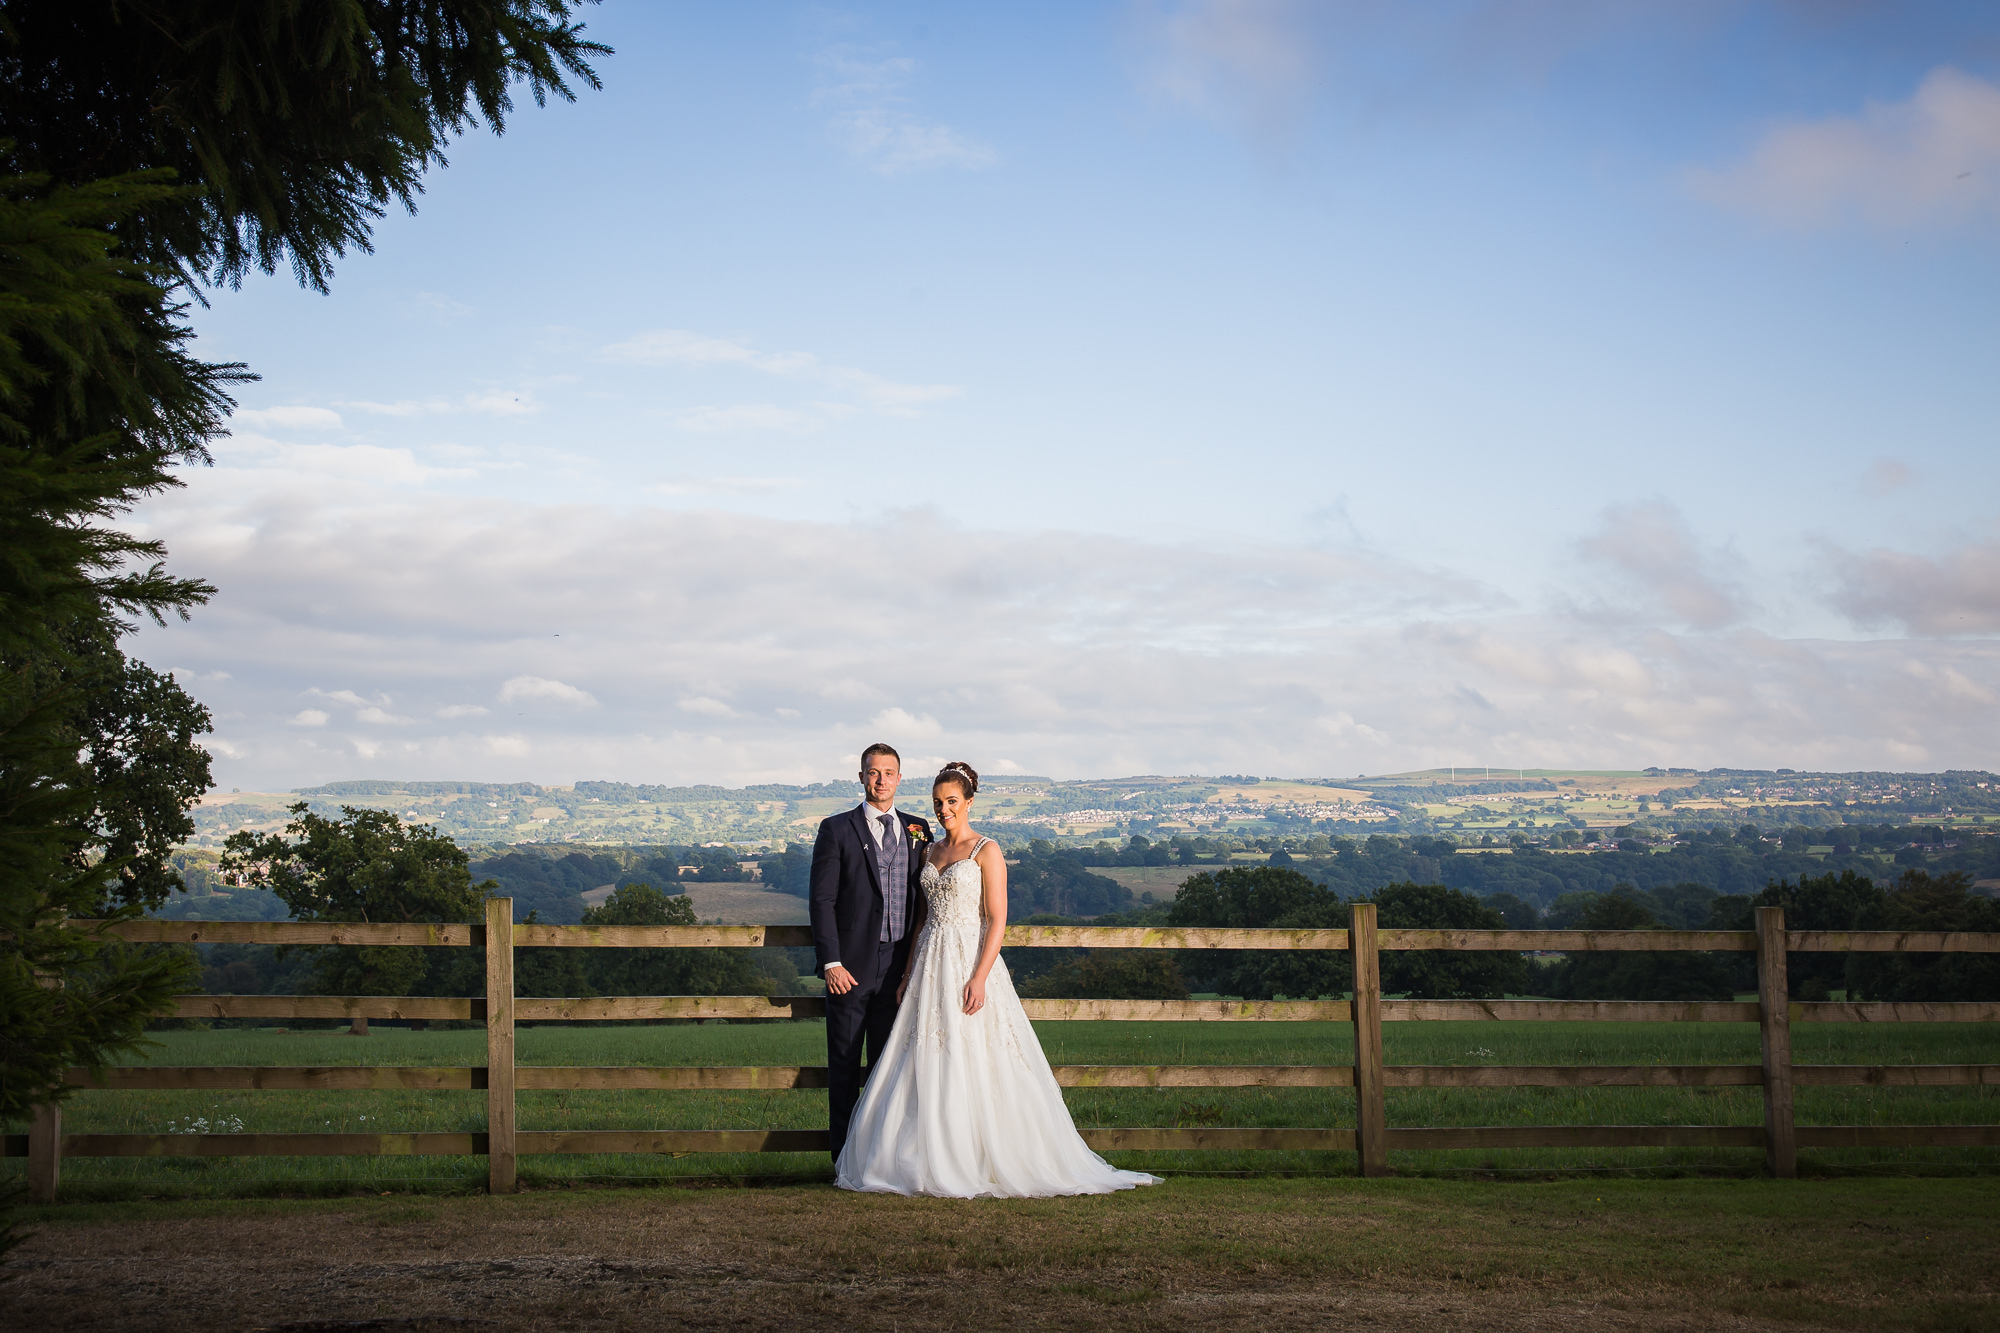 bride and groom portrait showing scenic views of the valley and hills at their Rustic Shireburn Arms Wedding